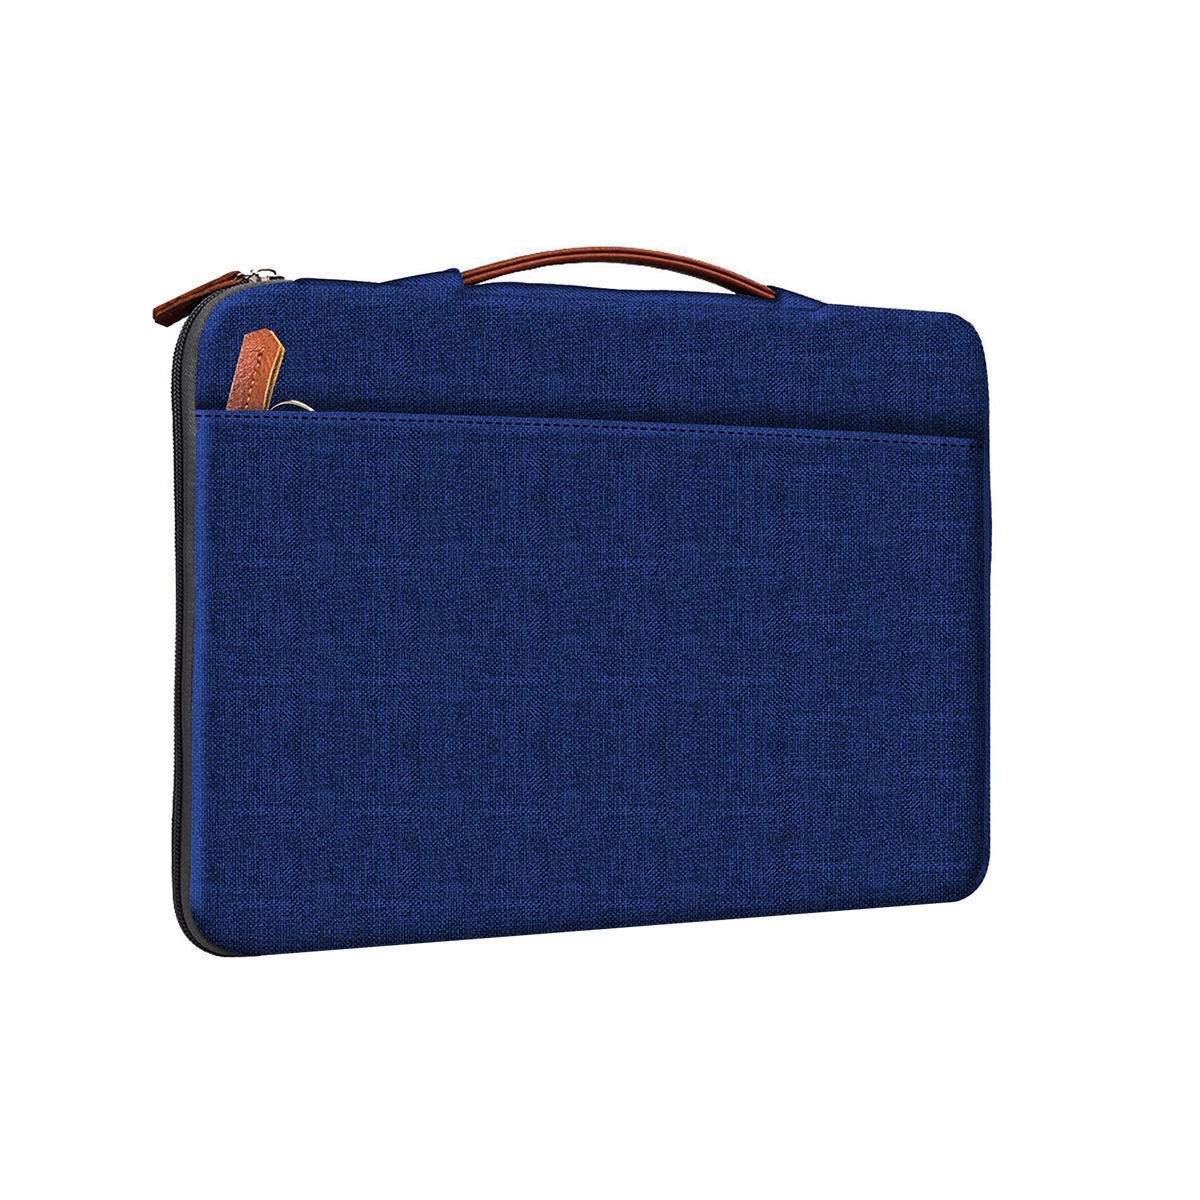 GRIPP Grace Drop - Proof Laptop Bag Sleeve For 13 - 13.3 Inches - Blue/Camel